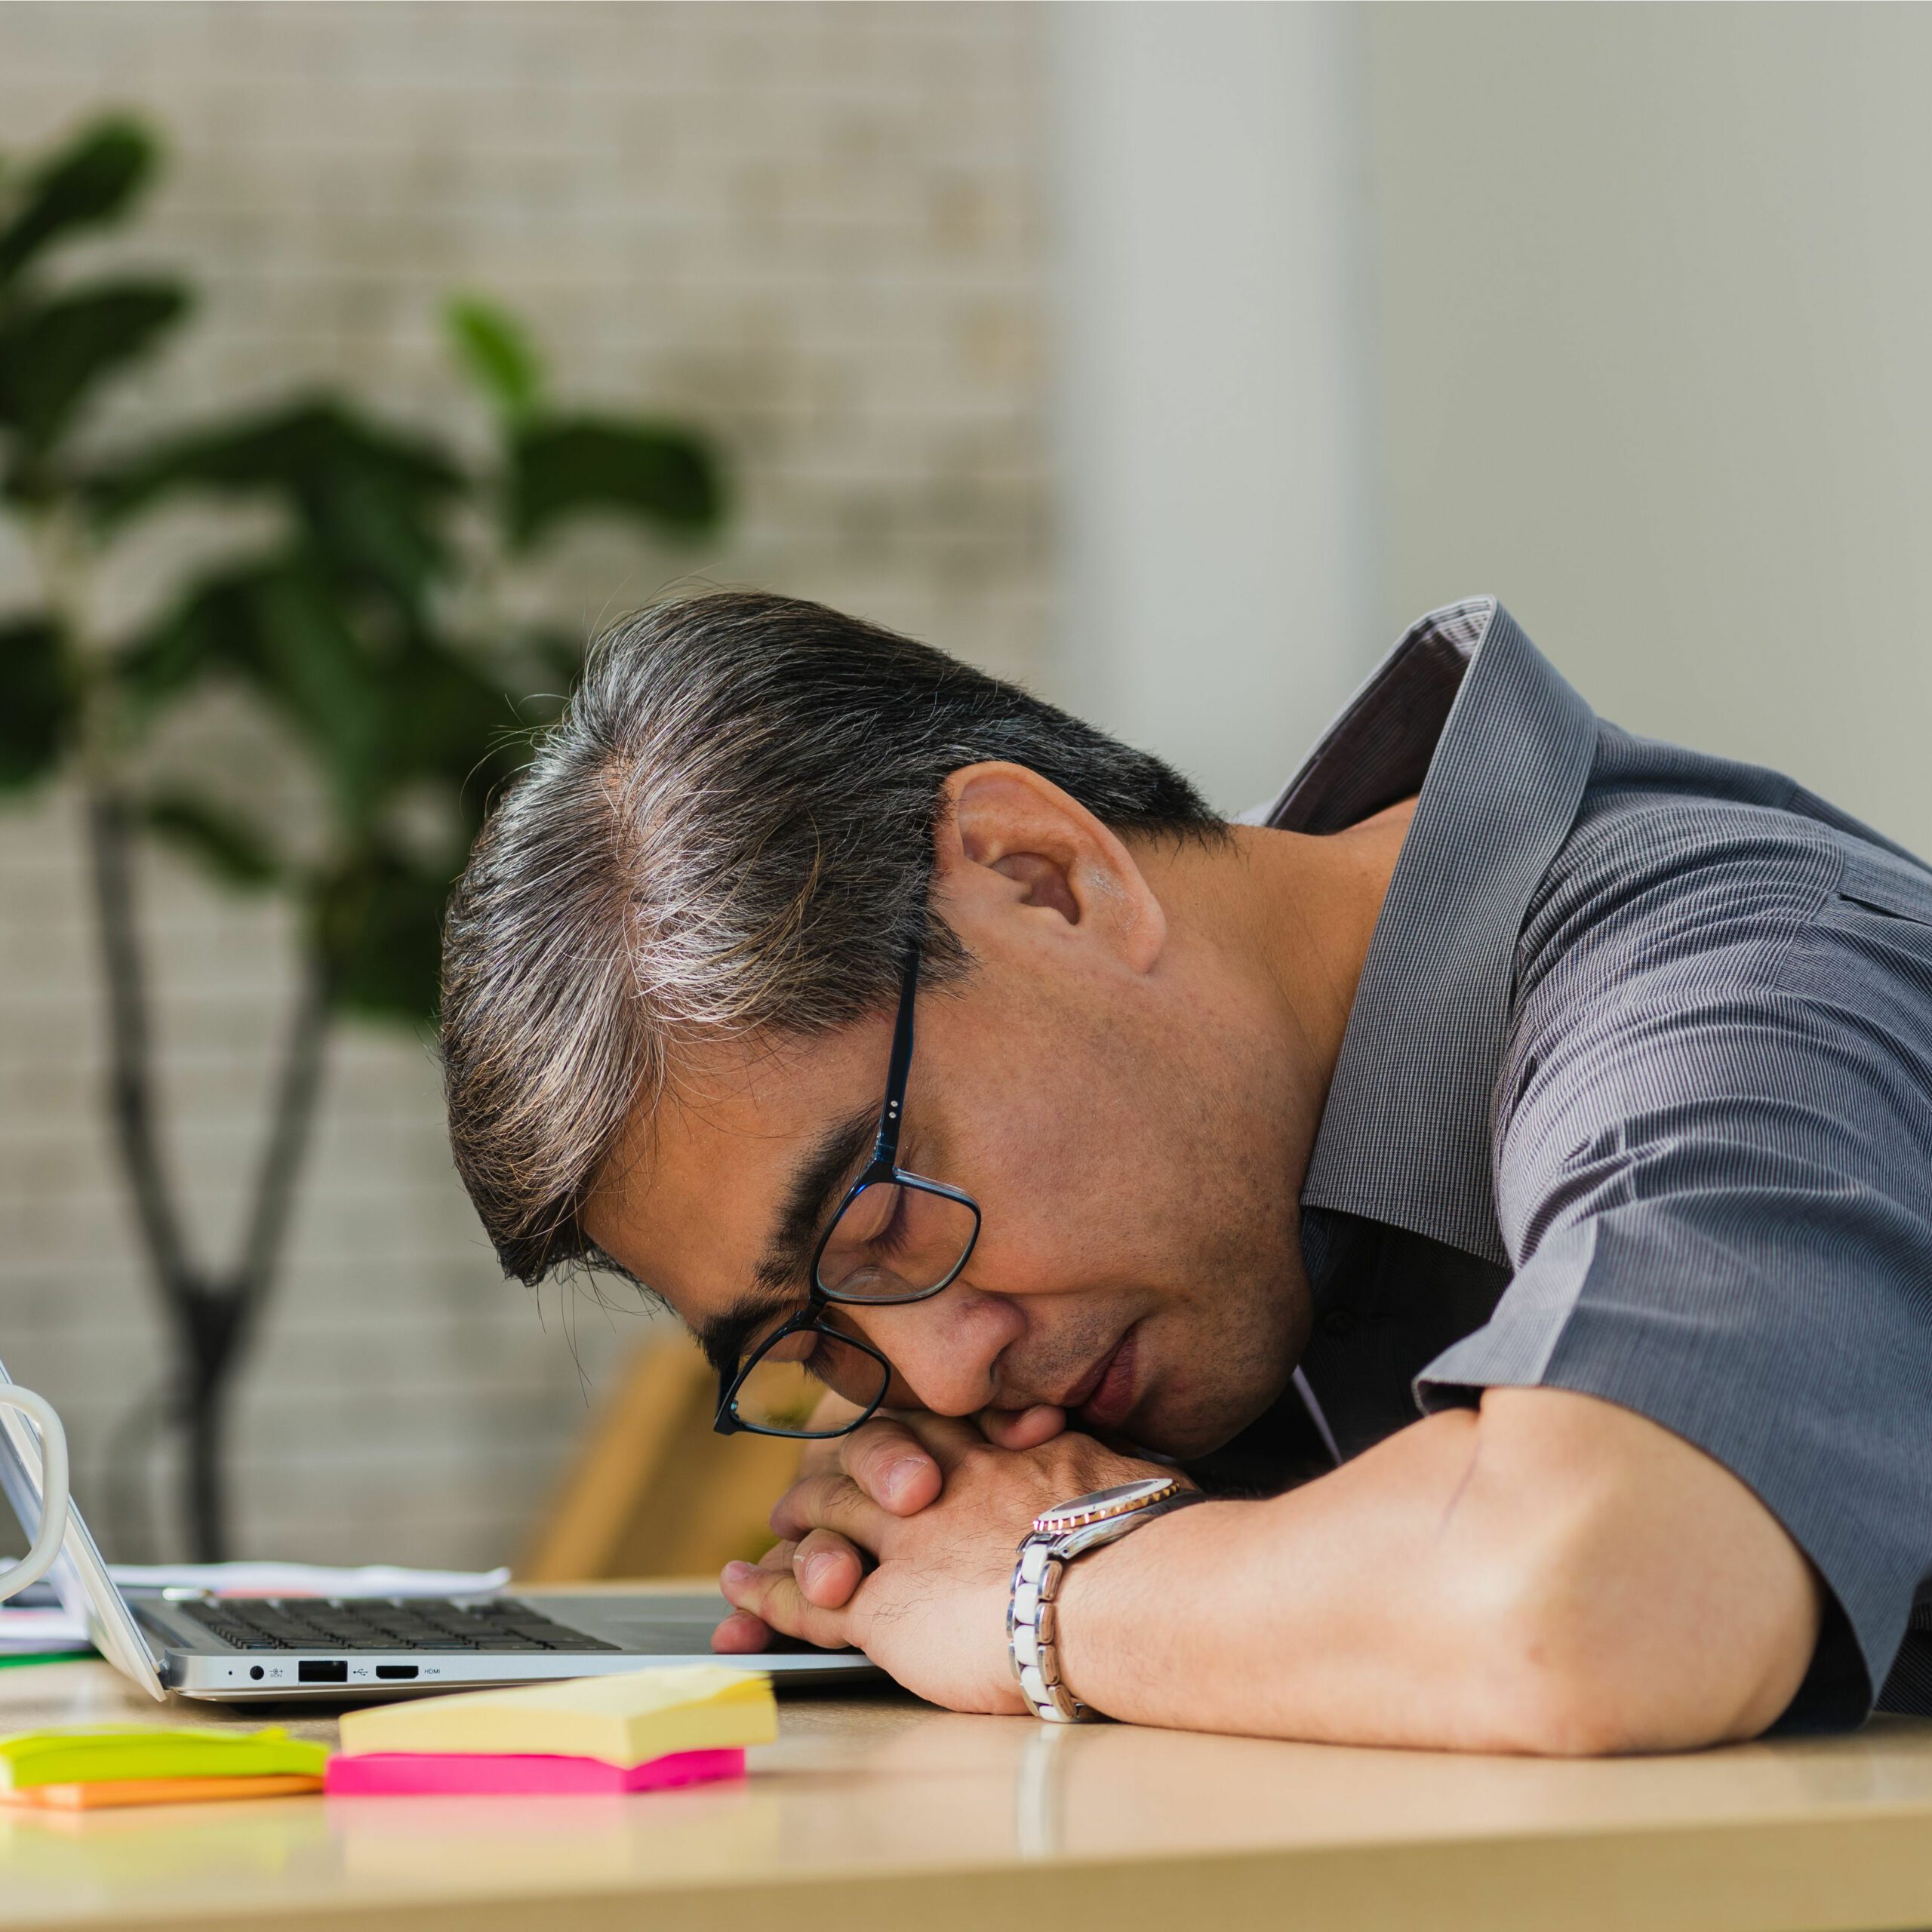 Man tired from work because low NAD+ levels can make chronic pain and fatigue worse.